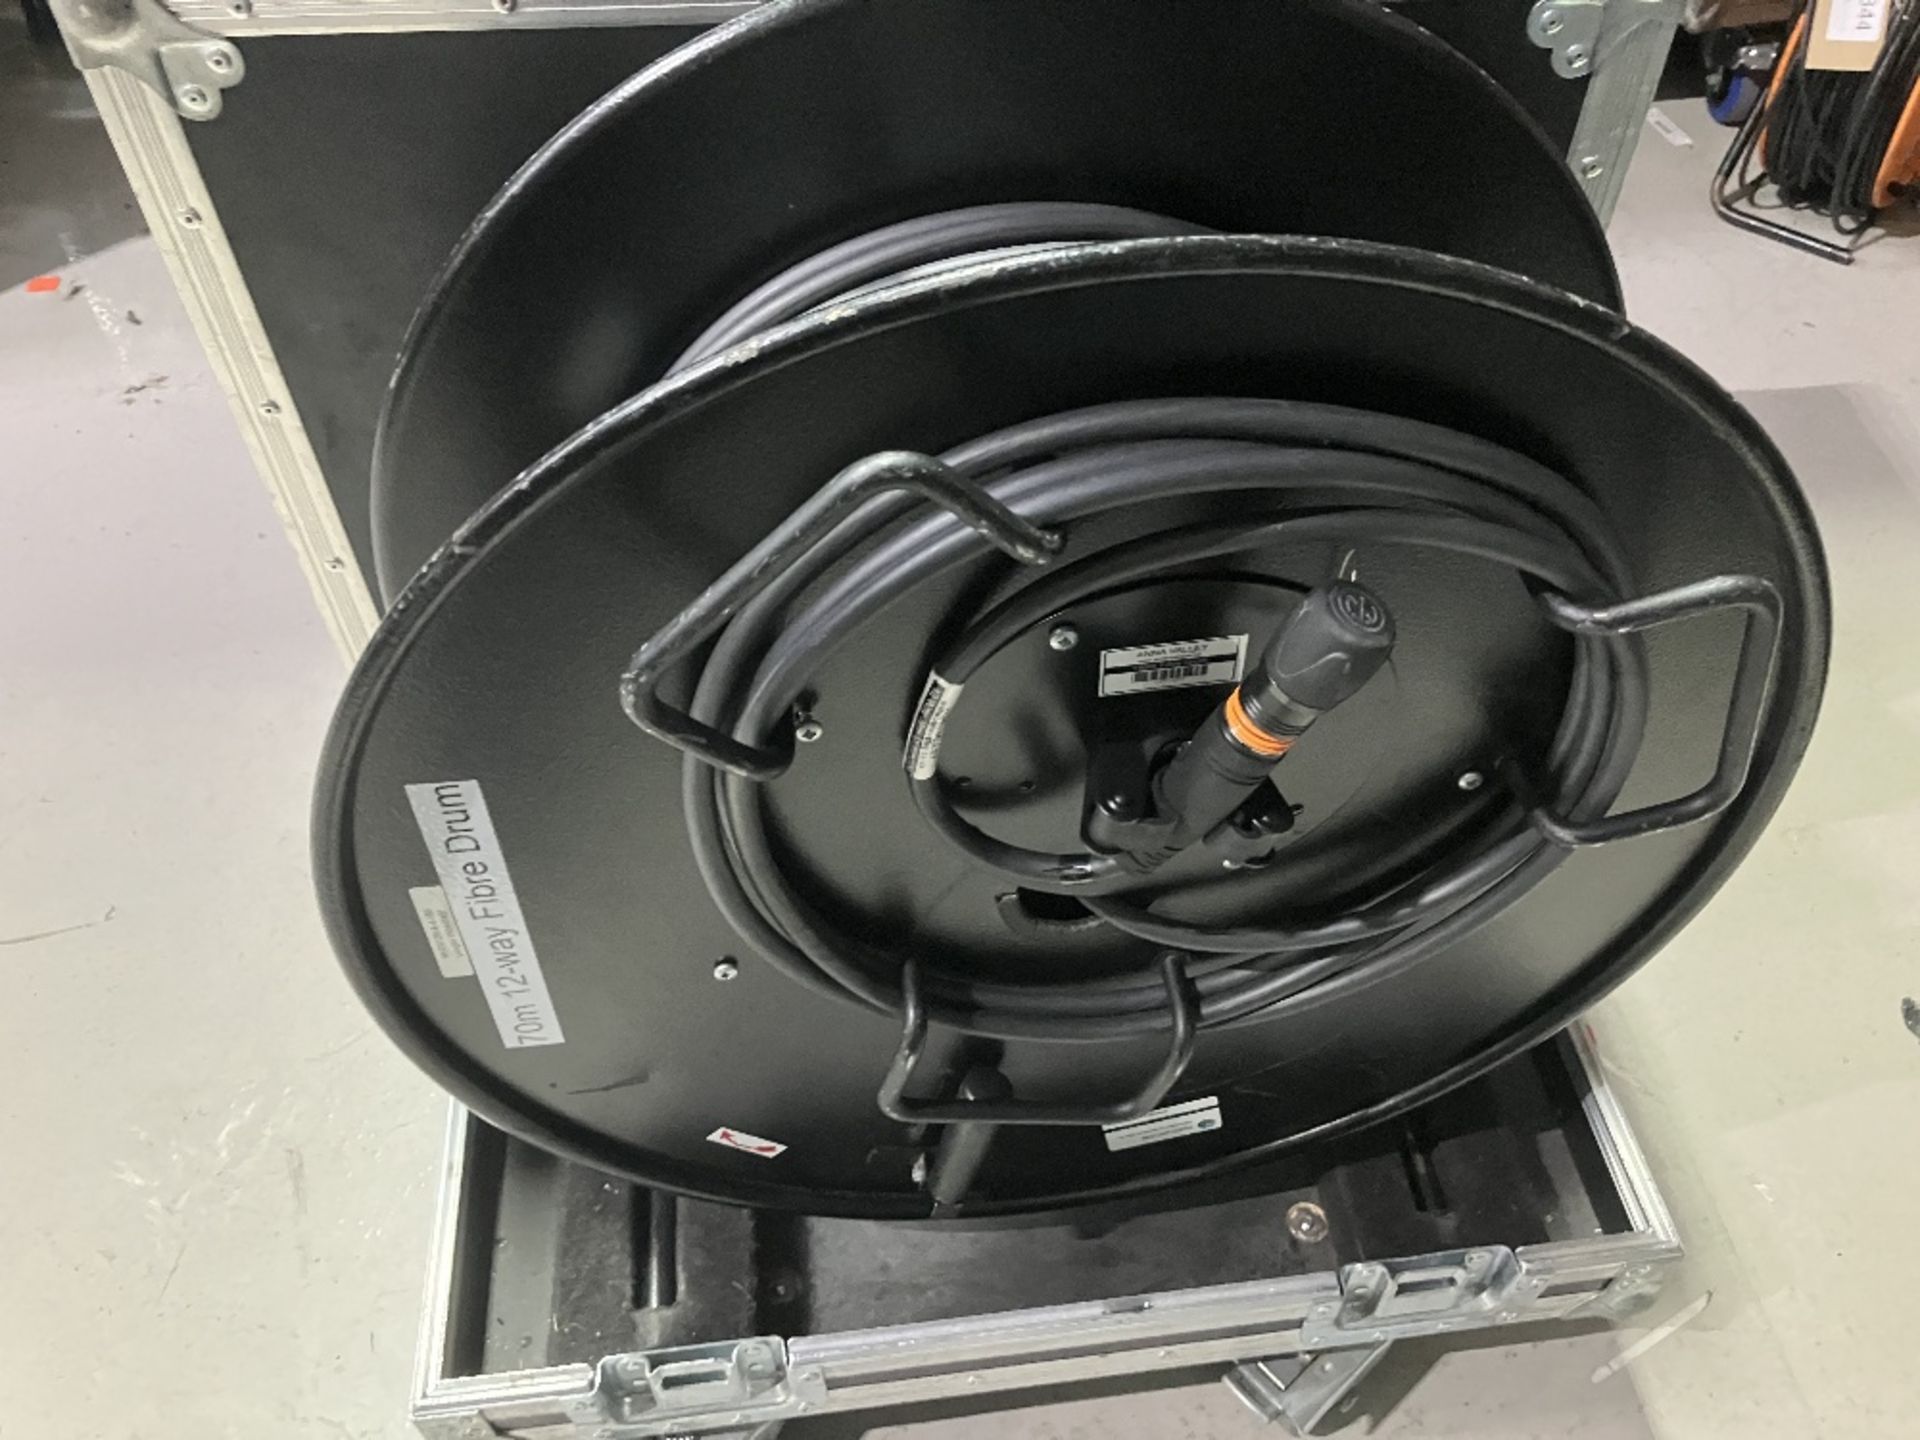 70m 12-way Fibre Cable Reel With Heavy Duty Mobile Flight Case - Image 6 of 7